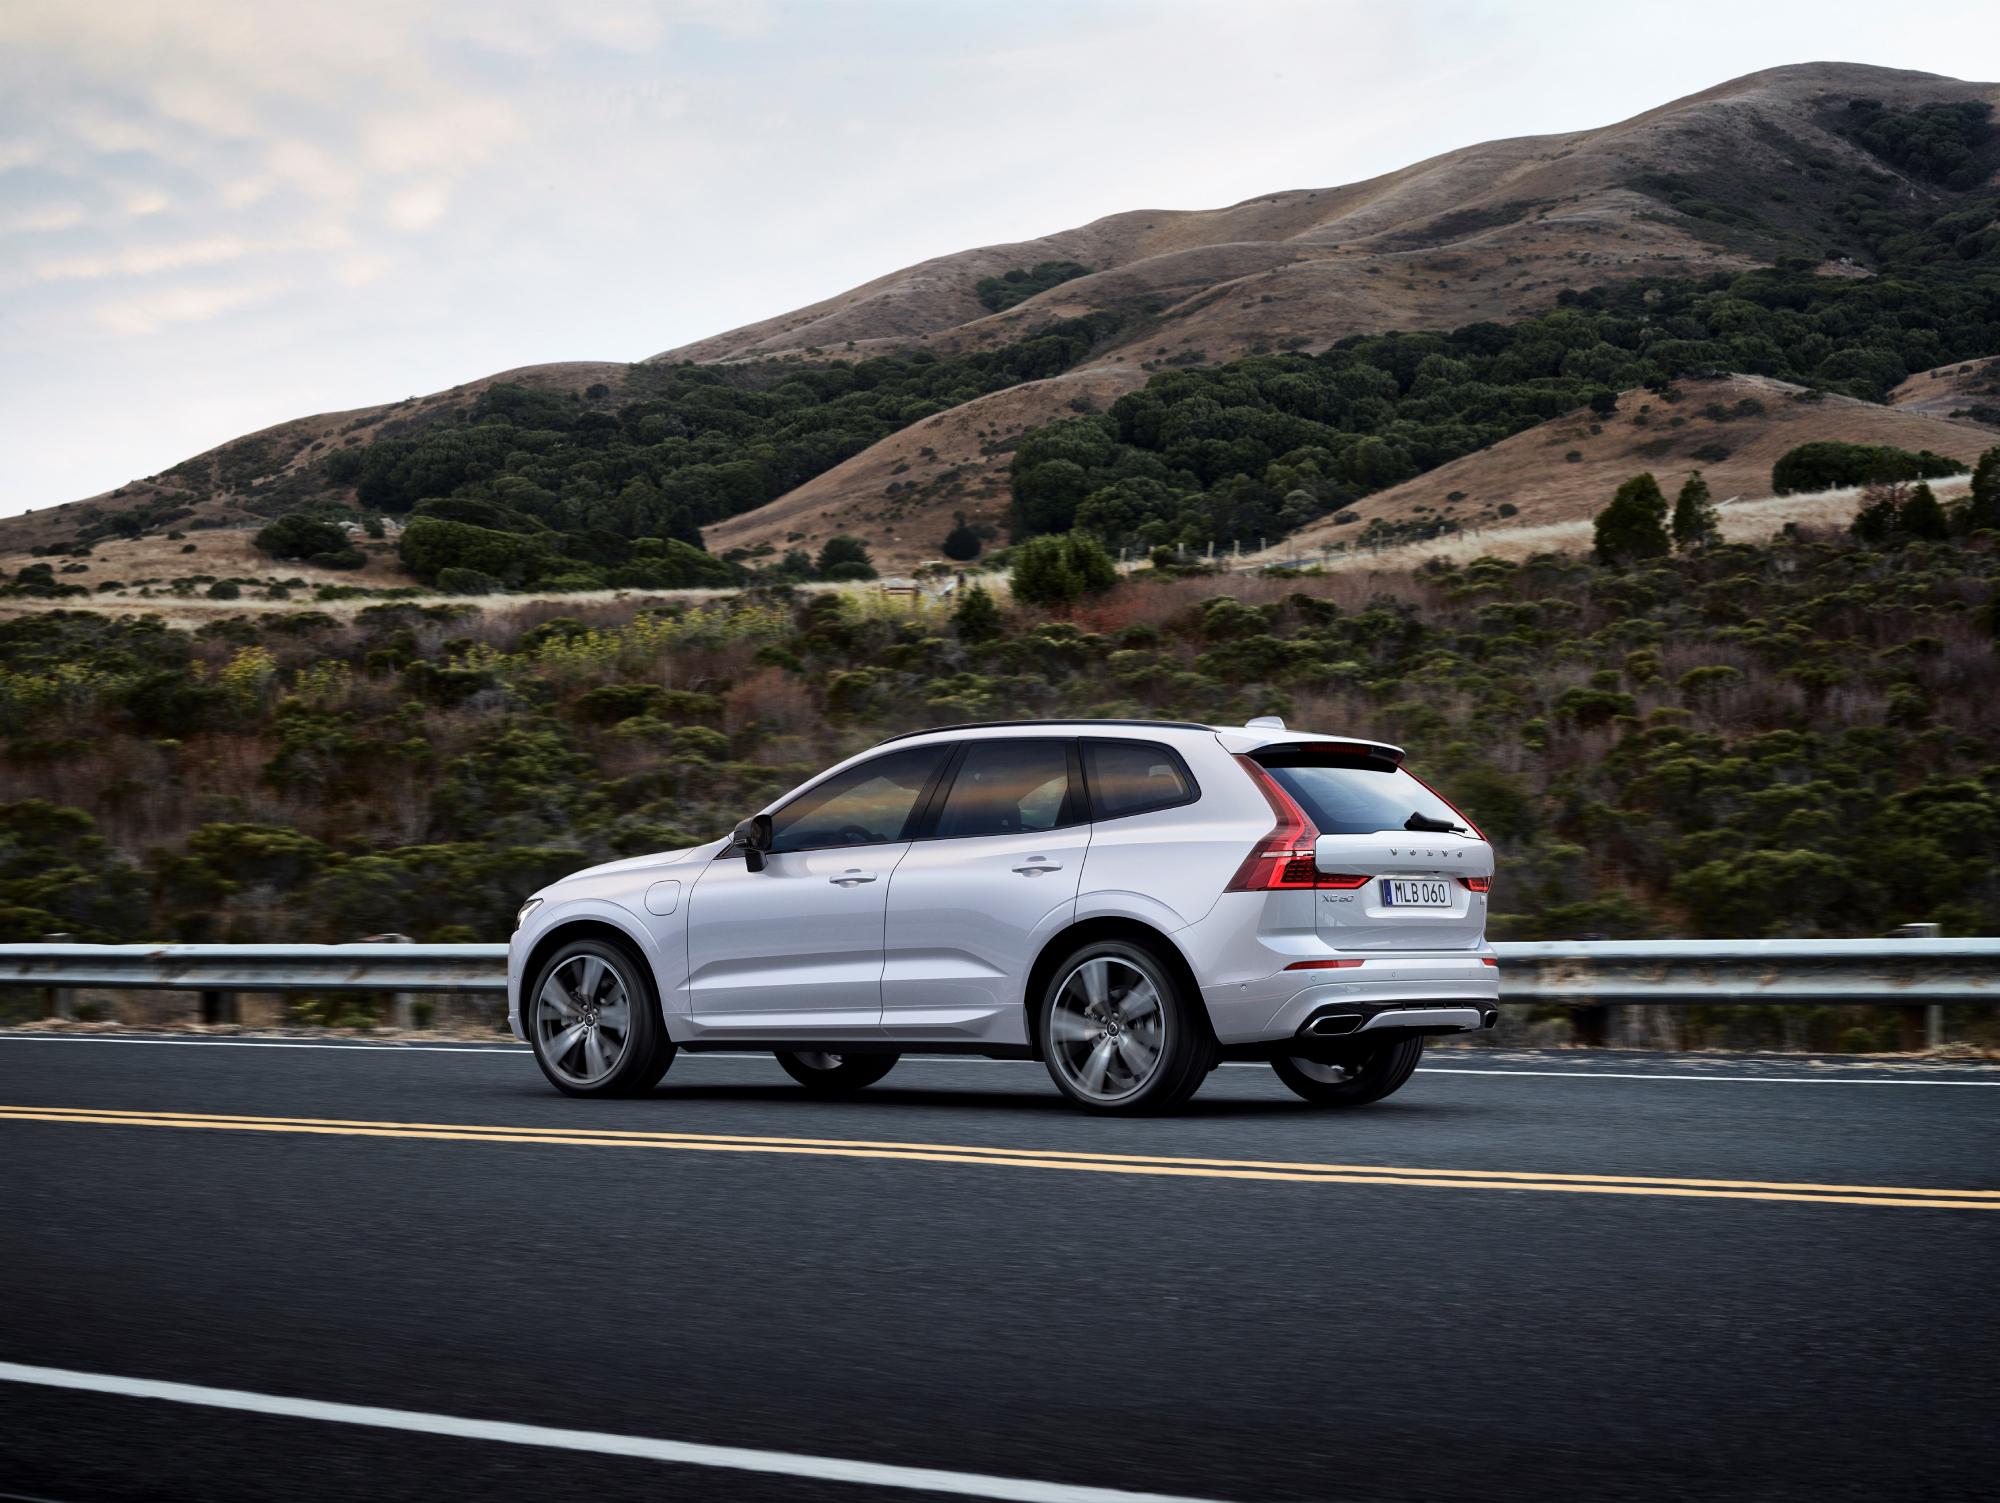 Volvo’s Recharge line-up, including the best-selling XC60, continues to be popular among consumers.